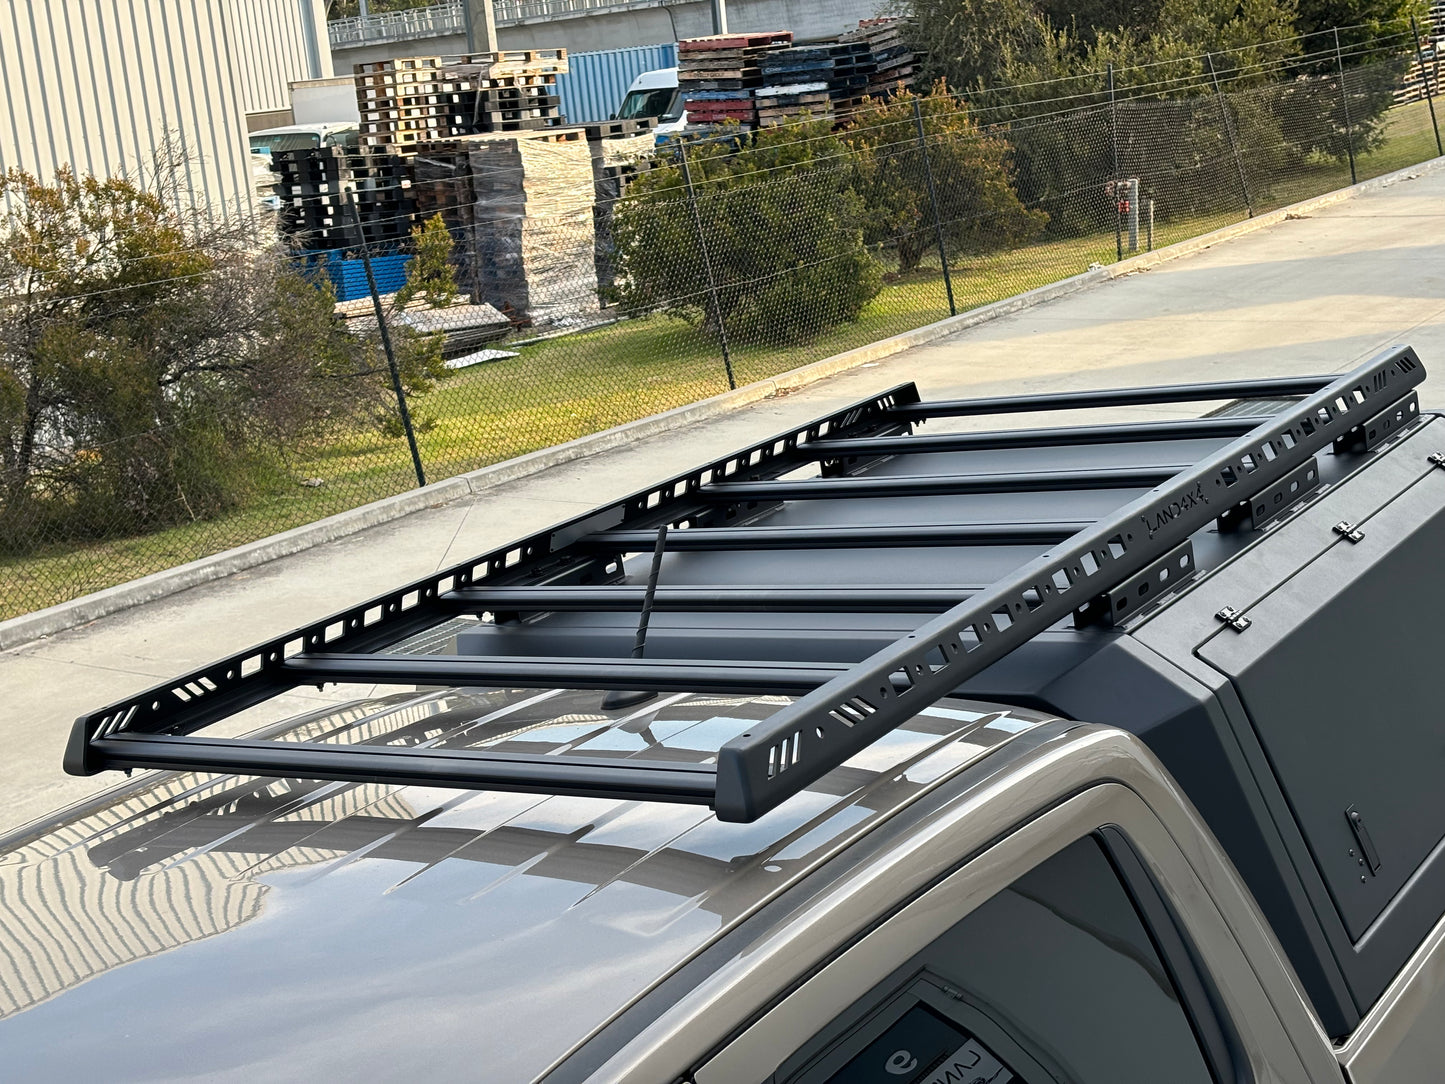 GWM Ute Cannon canopy roof rack